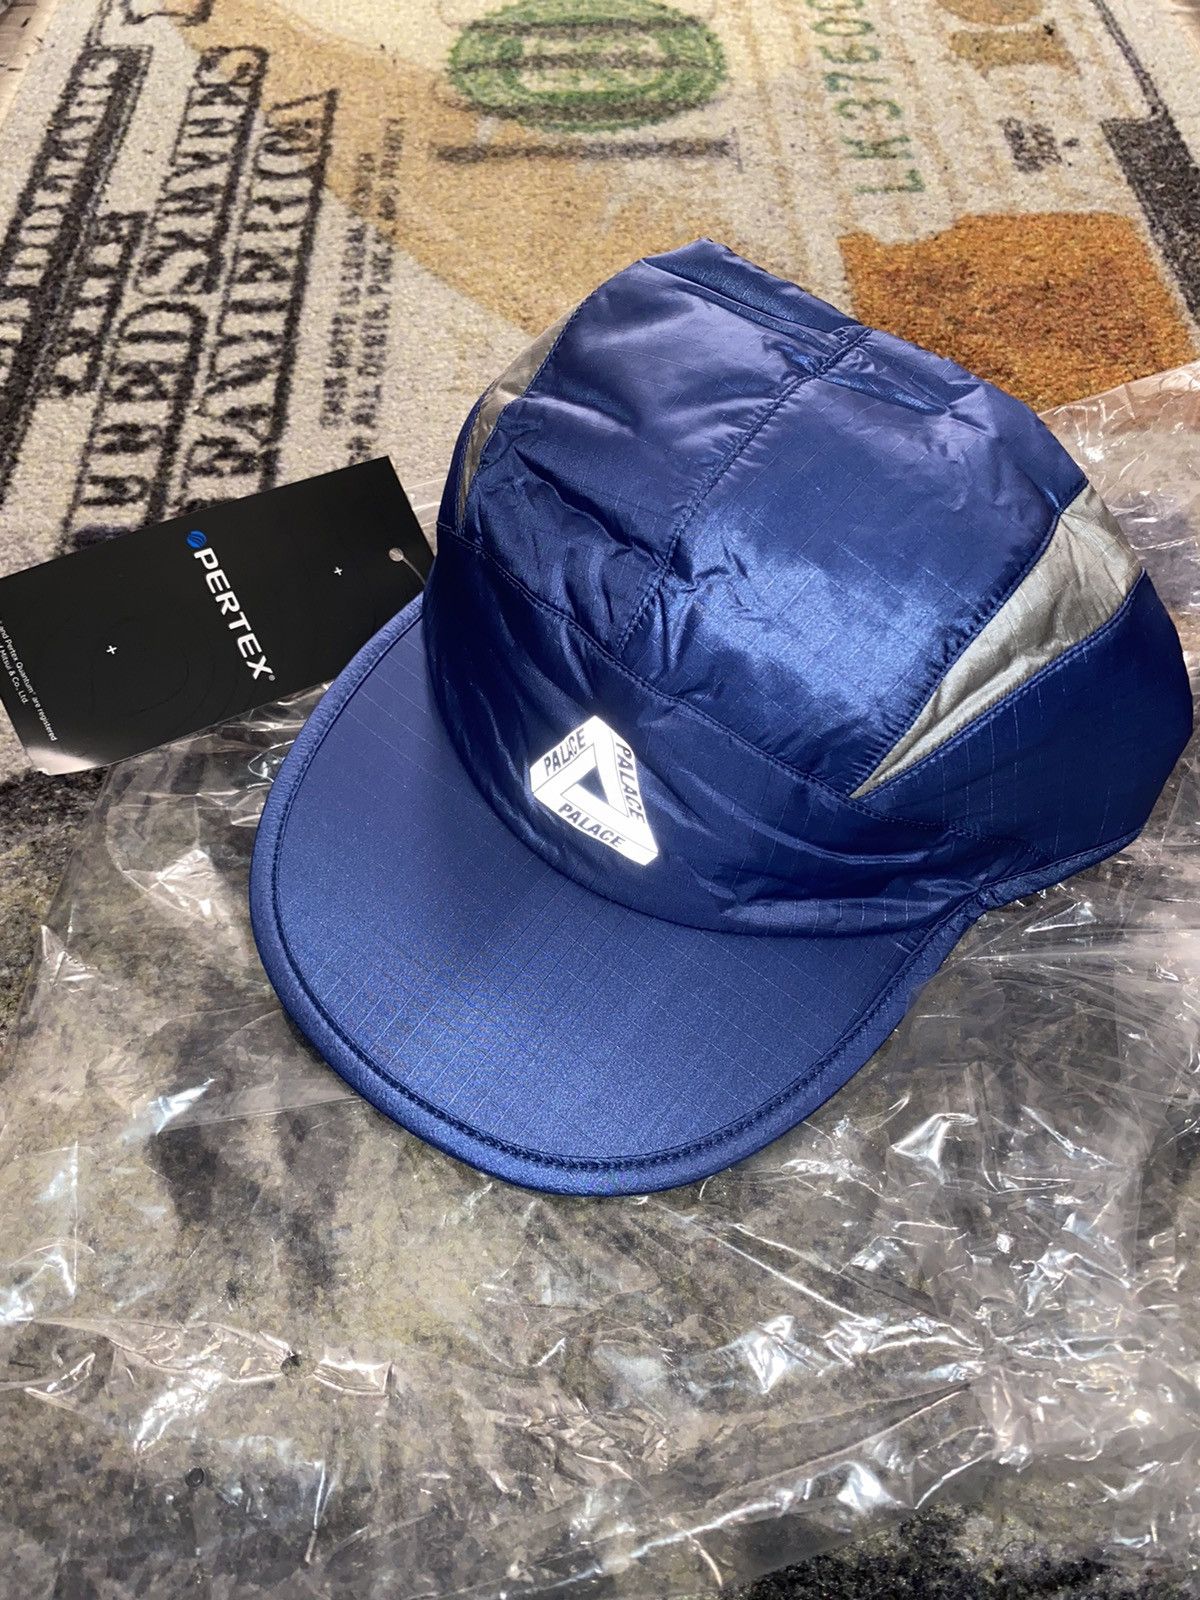 Palace Palace Pertex Tri-Cool Runner Blue | Grailed